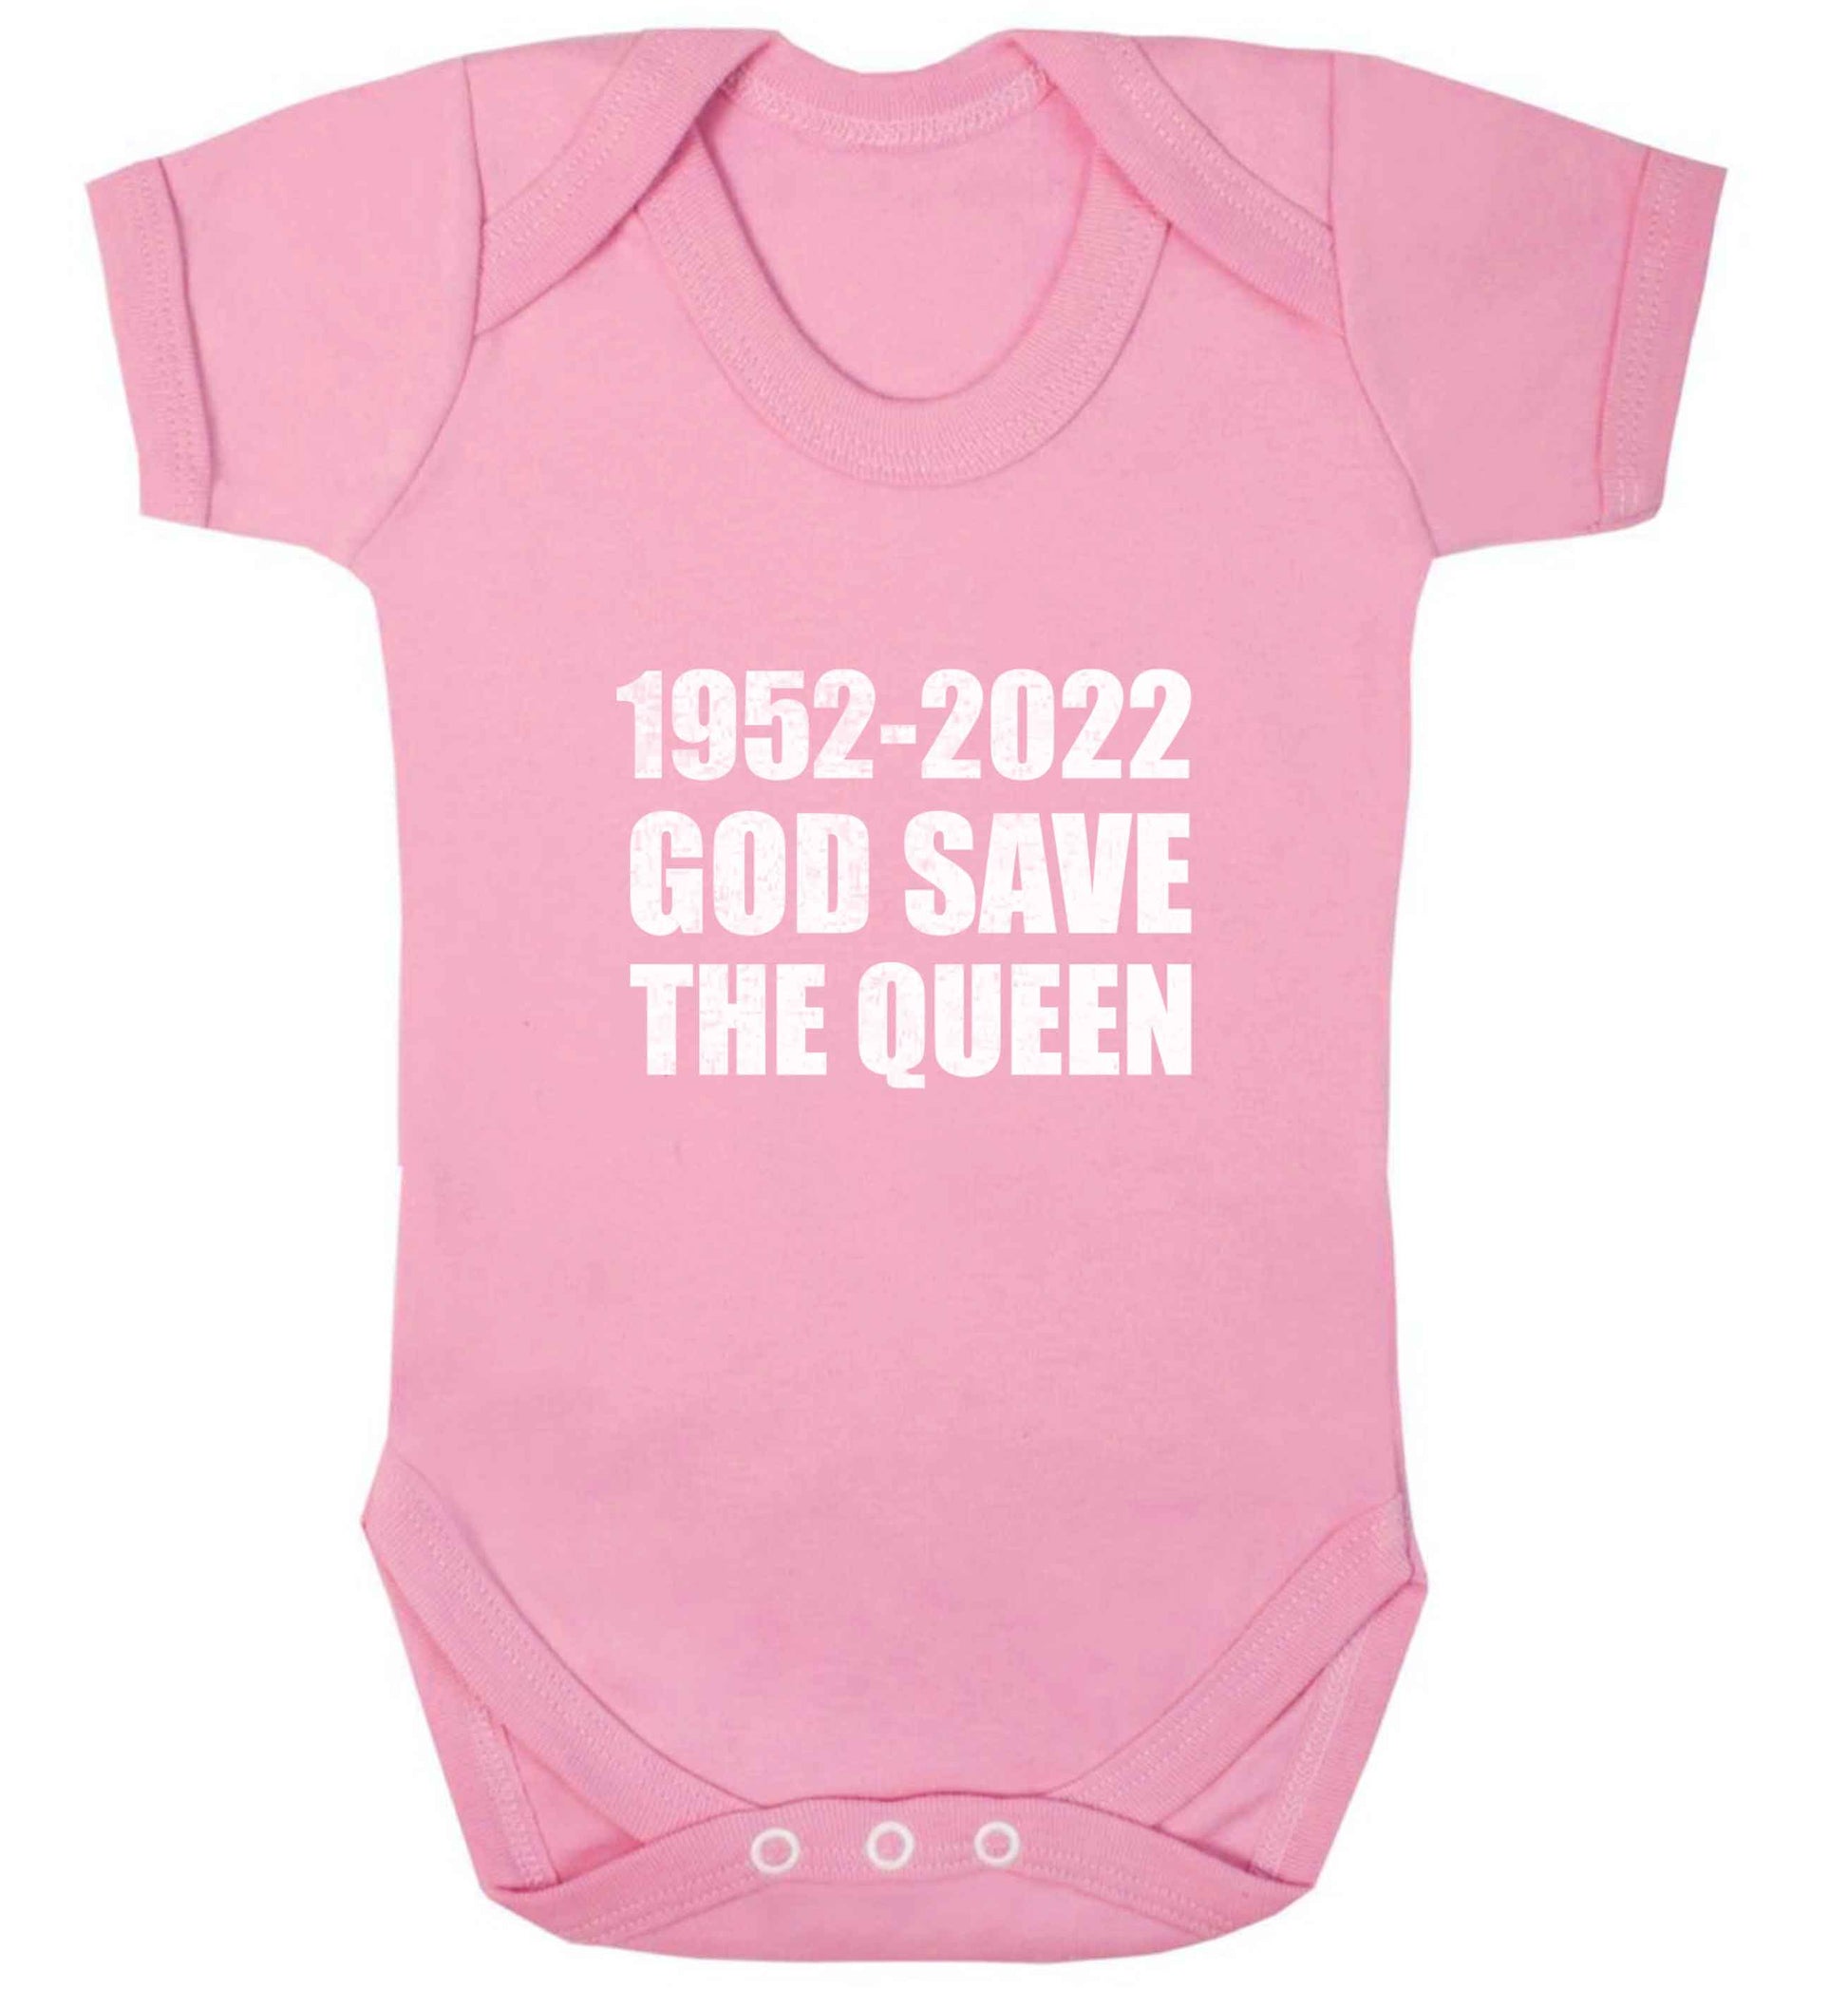 God save the queen baby vest pale pink 18-24 months